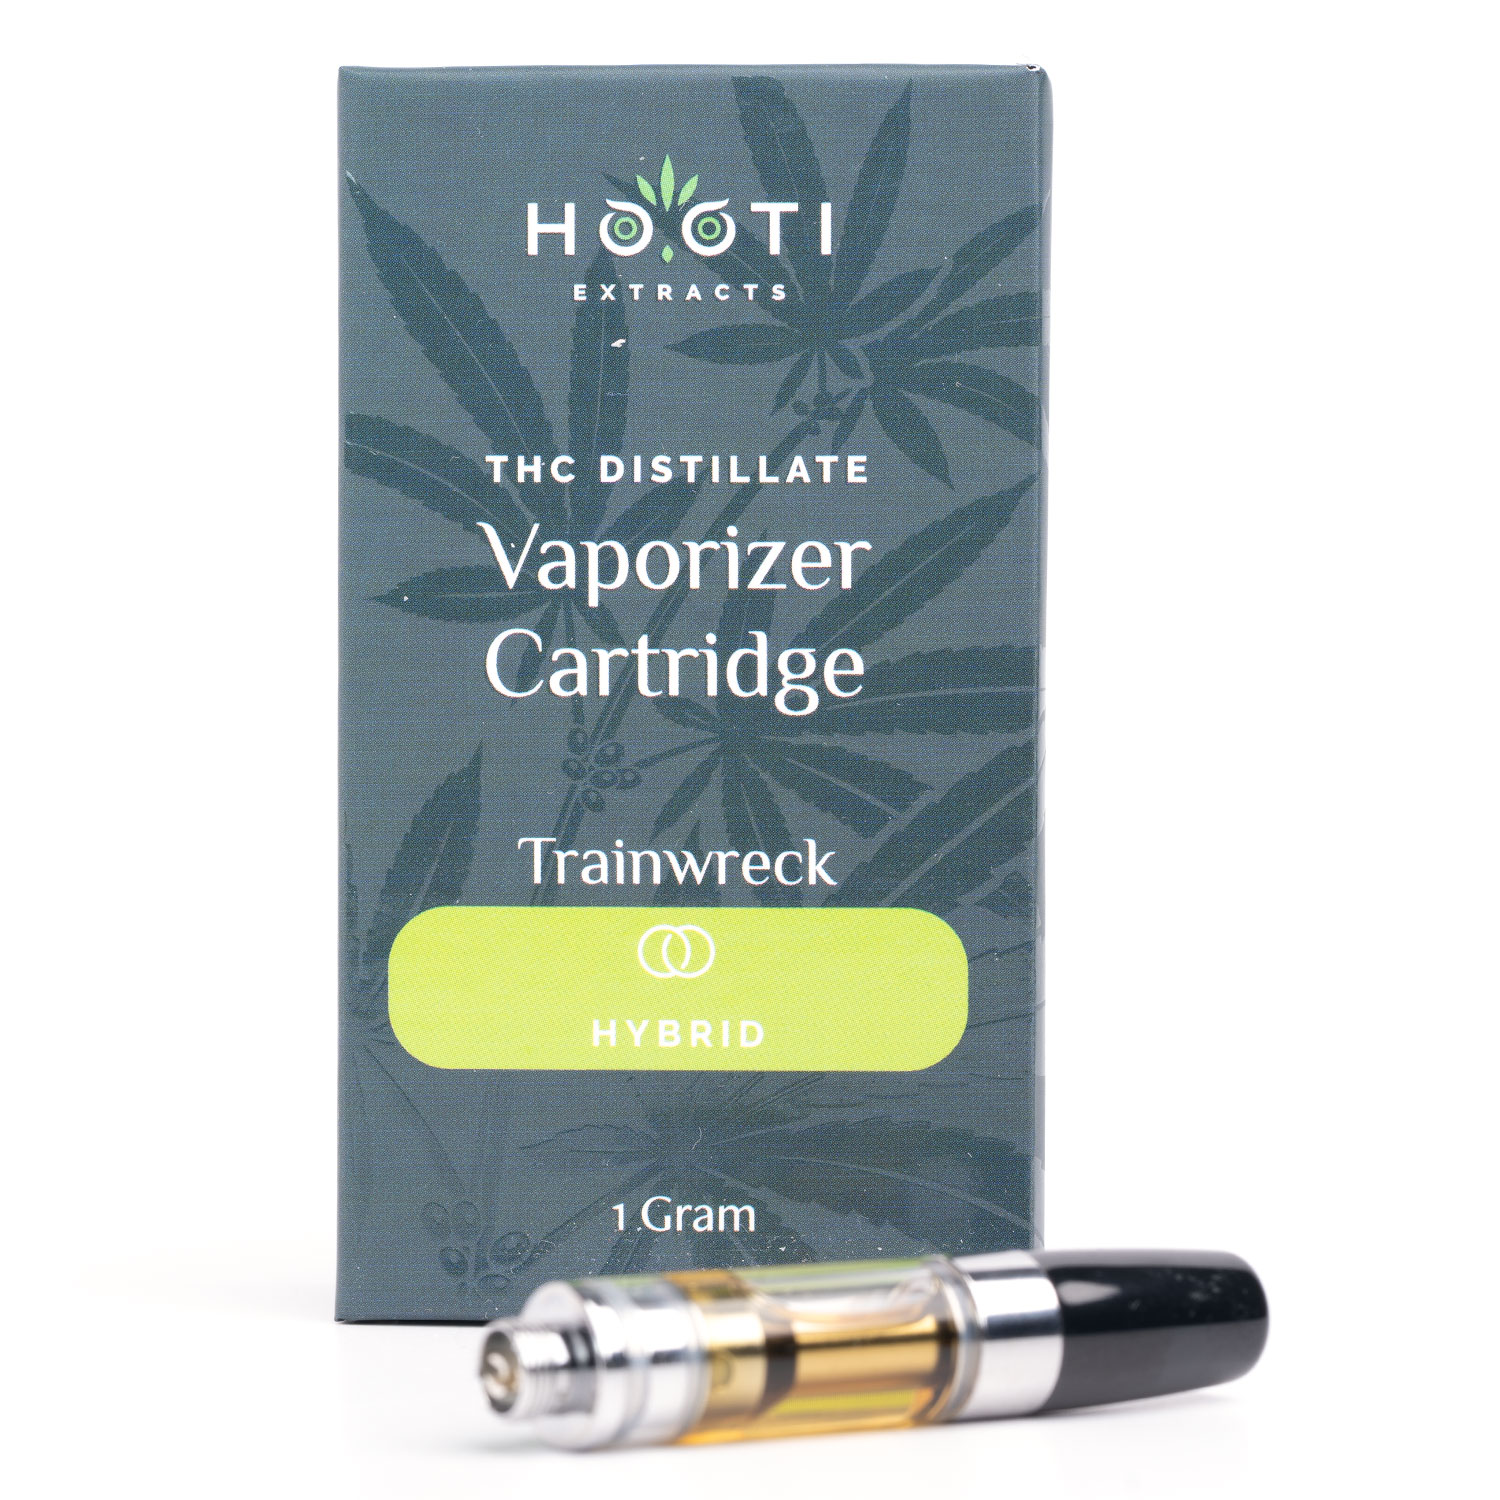 hooti extracts cartridges